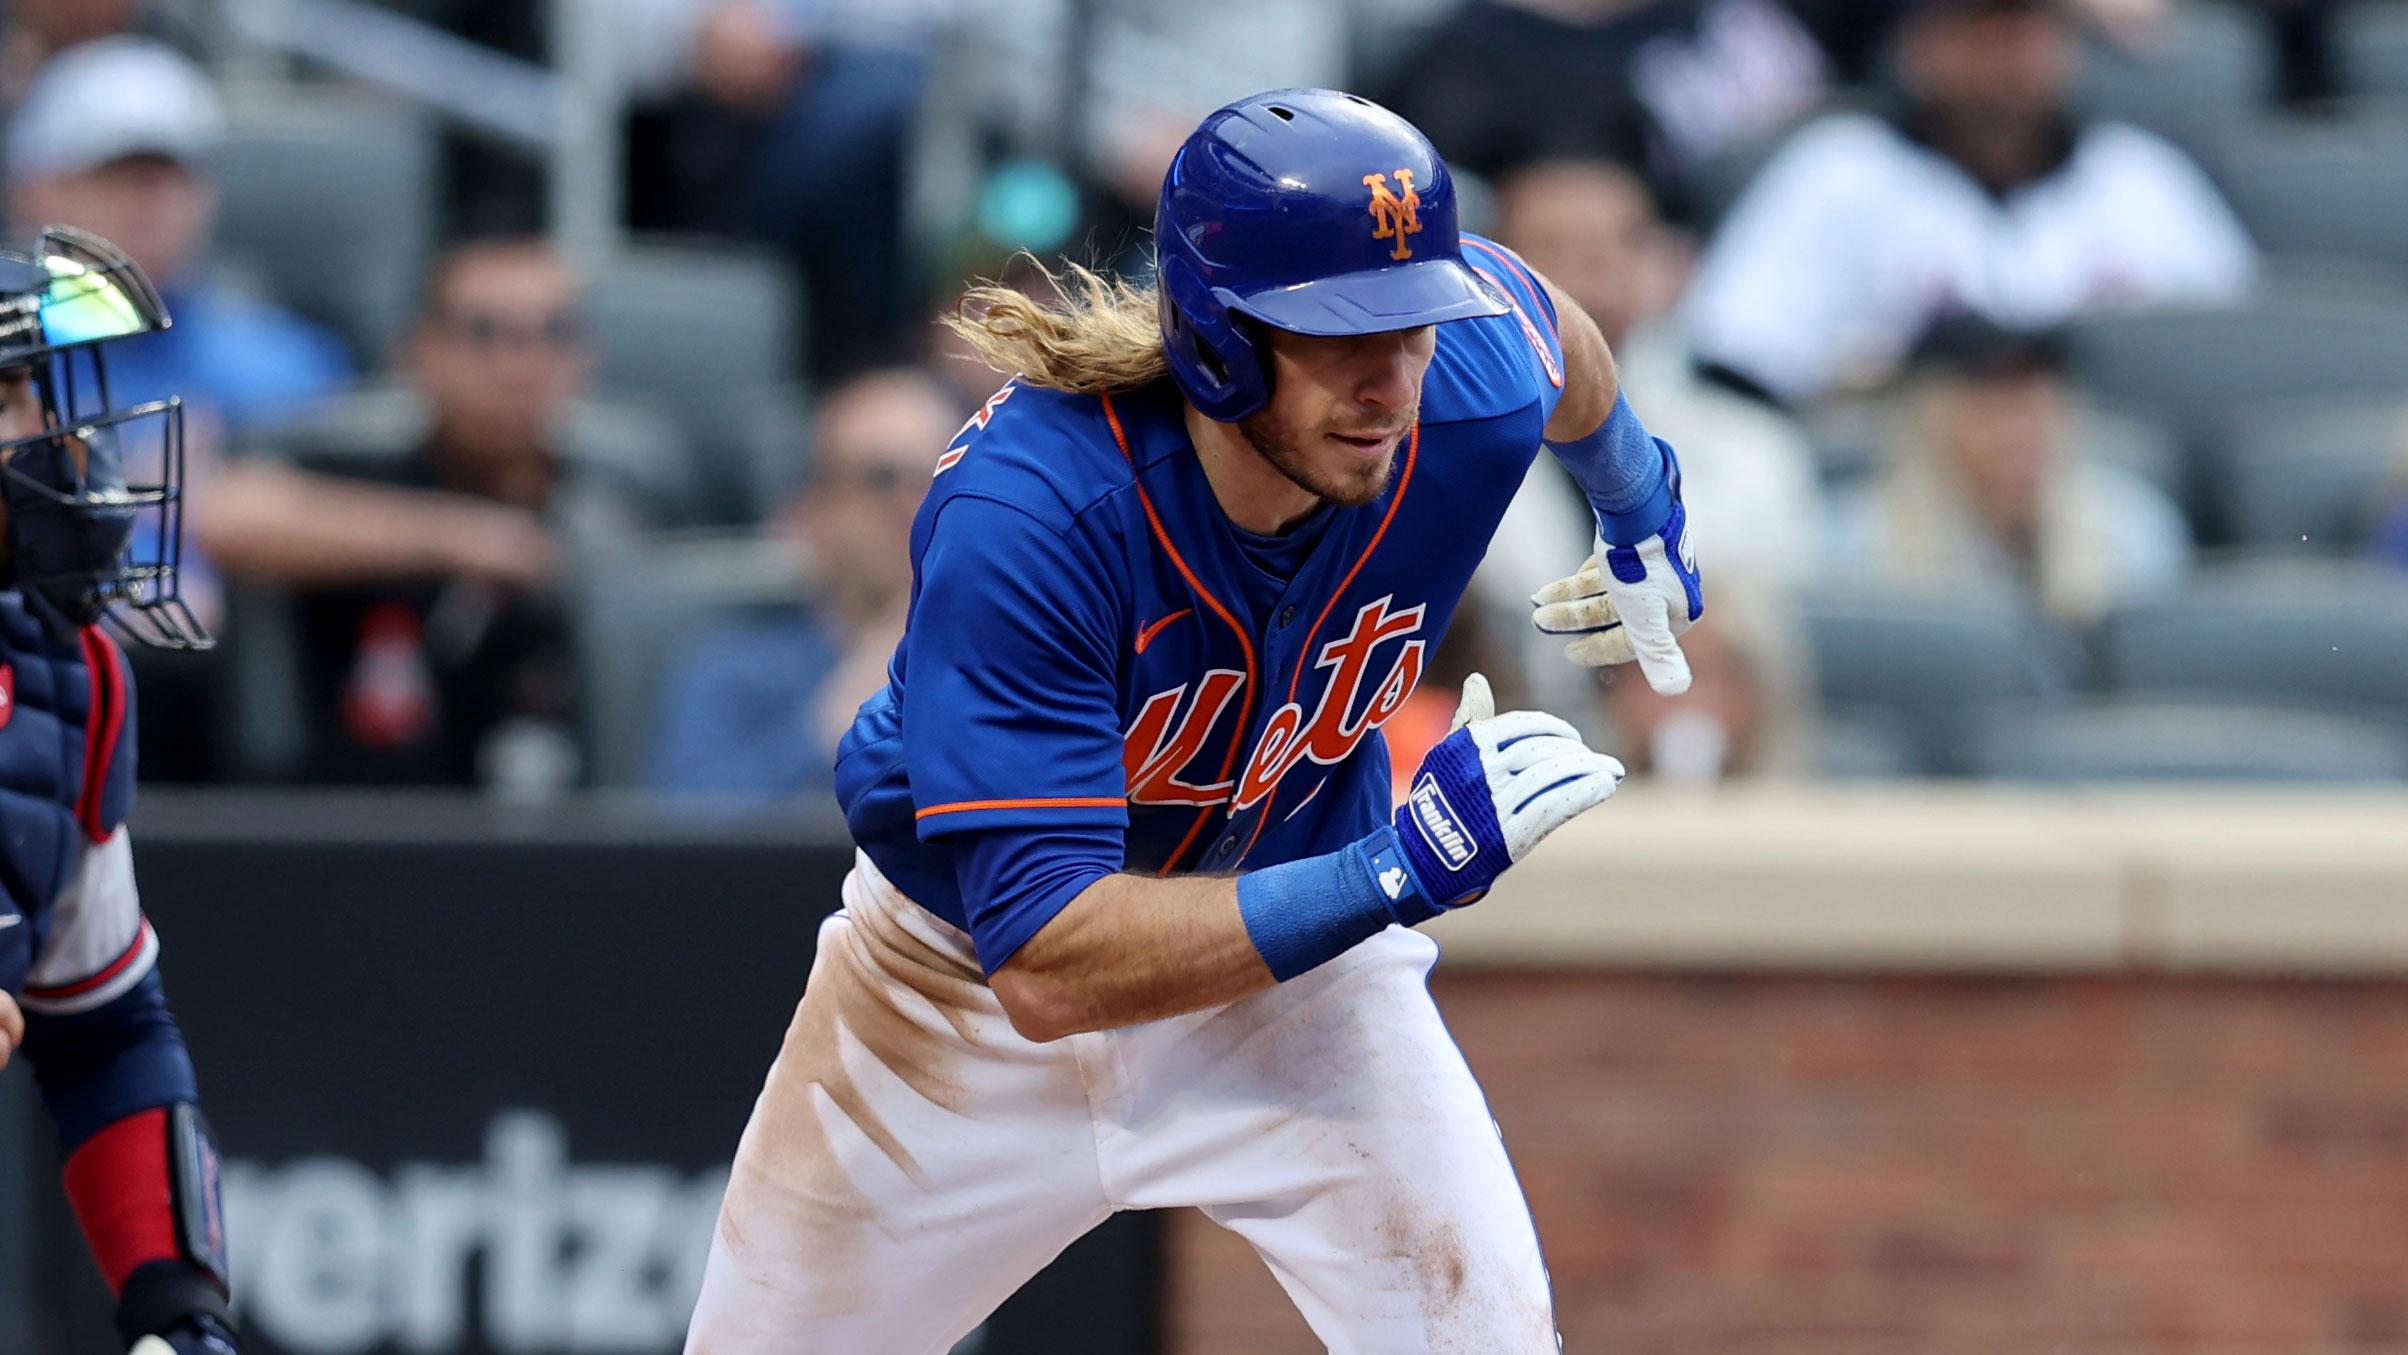 May 3, 2022; New York City, New York, USA; New York Mets center fielder Travis Jankowski (16) runs out an infield single against the Atlanta Braves during the sixth inning at Citi Field. / Brad Penner-USA TODAY Sports